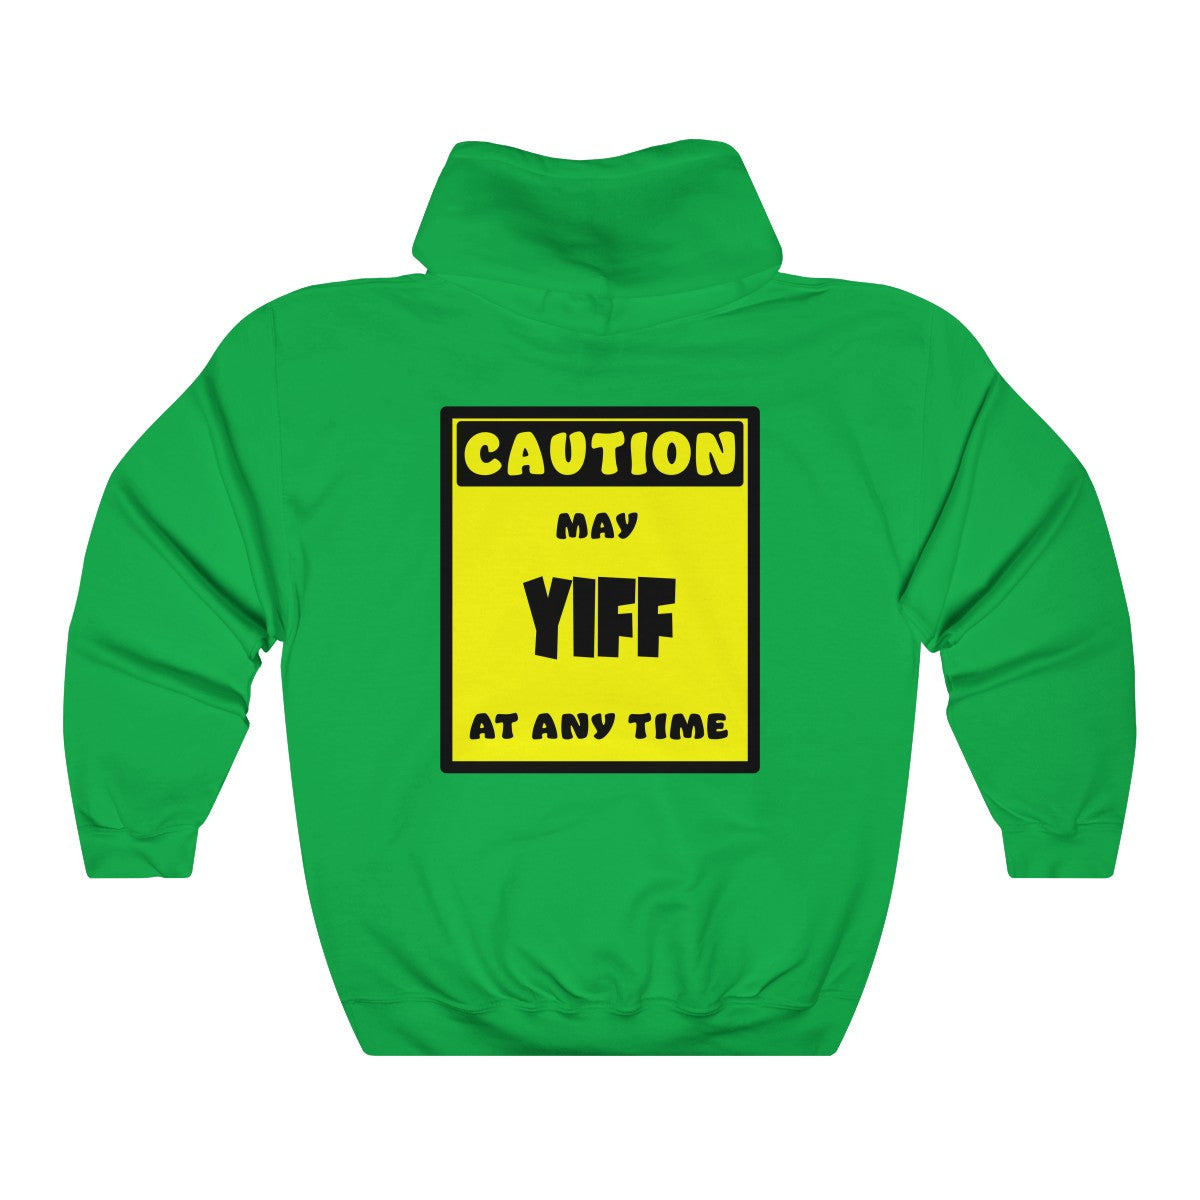 CAUTION! May YIFF at any time! - Hoodie Hoodie AFLT-Whootorca Green S 